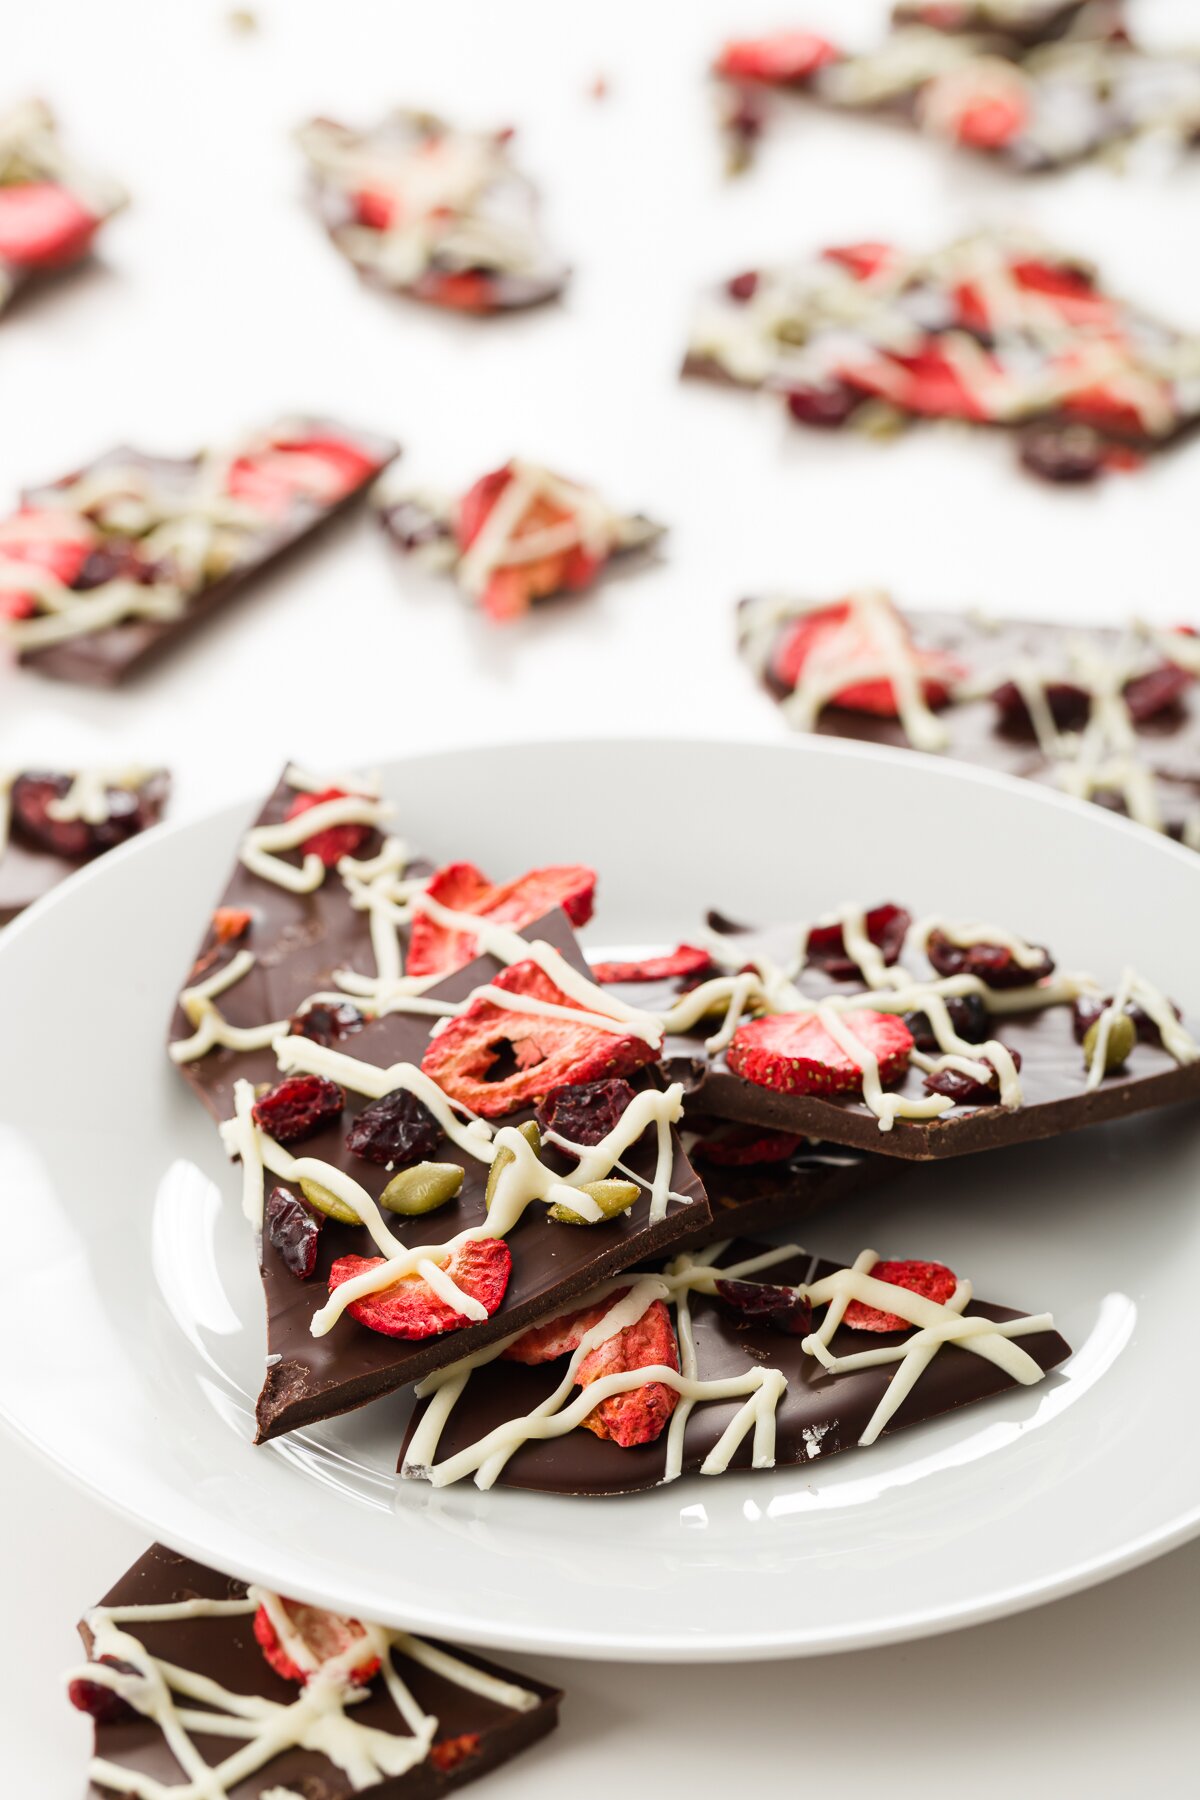 Plate of chocolate bark with extra pieces in the background